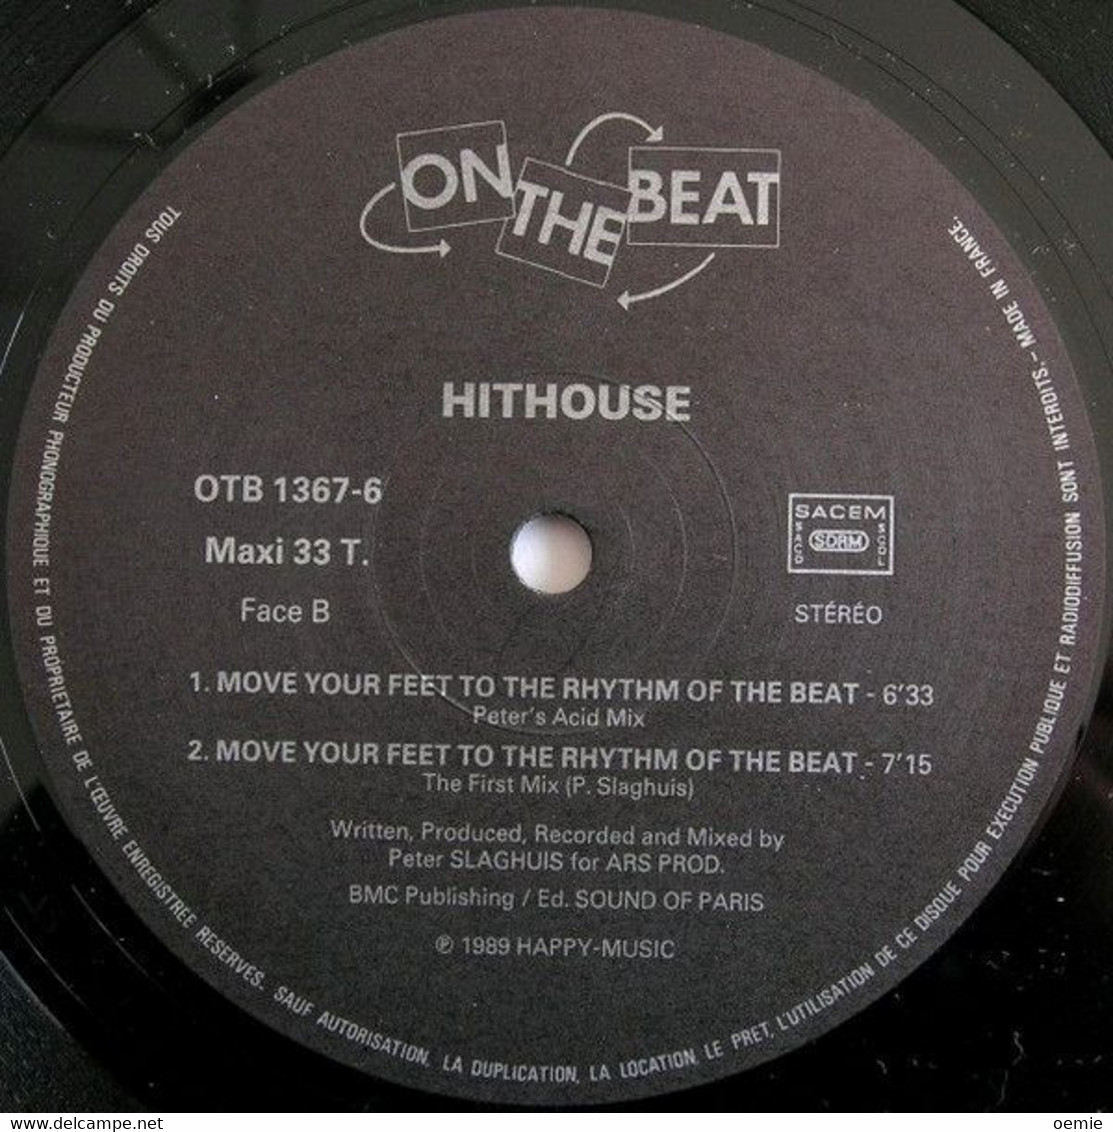 HITHOUSE °°  MOVE YOUR FEET TO THE RHYTHM OF THE BEAT  °  MAXIS 33 TOURS - 45 Rpm - Maxi-Single